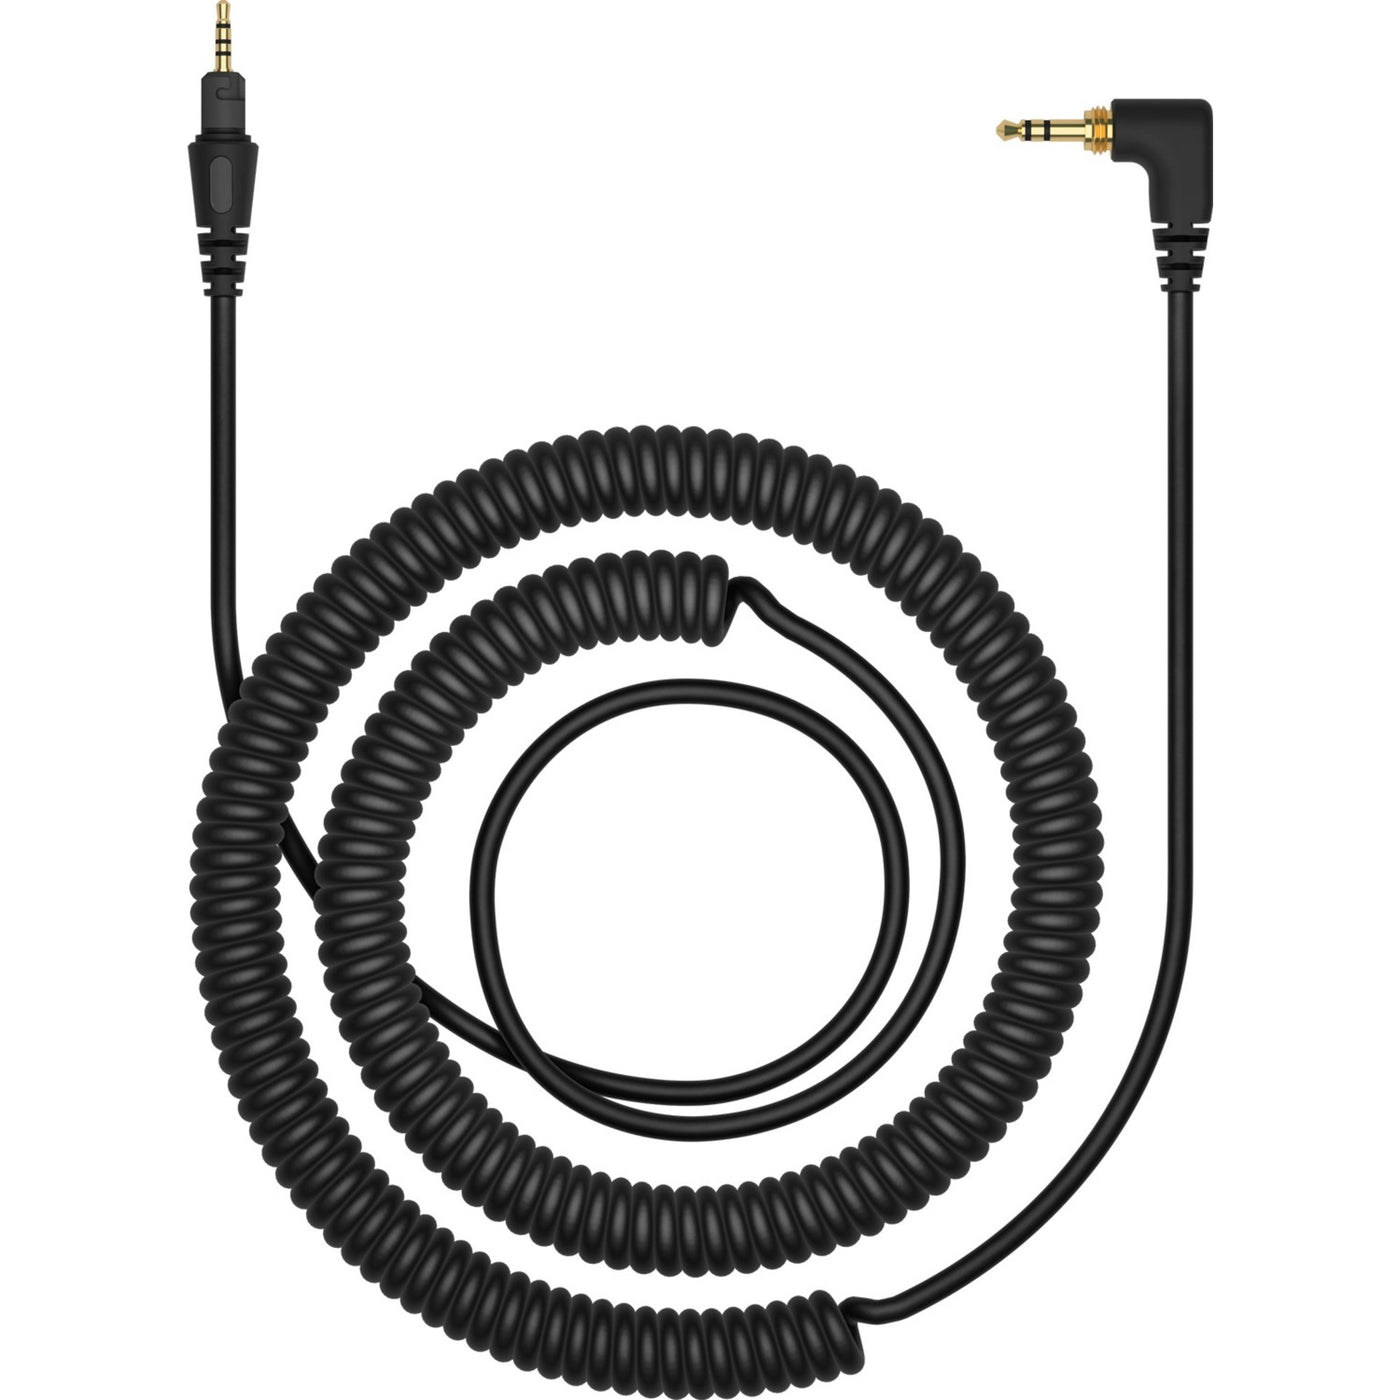 Pioneer DJ HC-CA0601 Coiled Extension Cable, 47.24-inch, for HDJ-X7 Studio Wired Headphones for Professional Audio, Aux Cable Cord for DJ Equipment and Recording